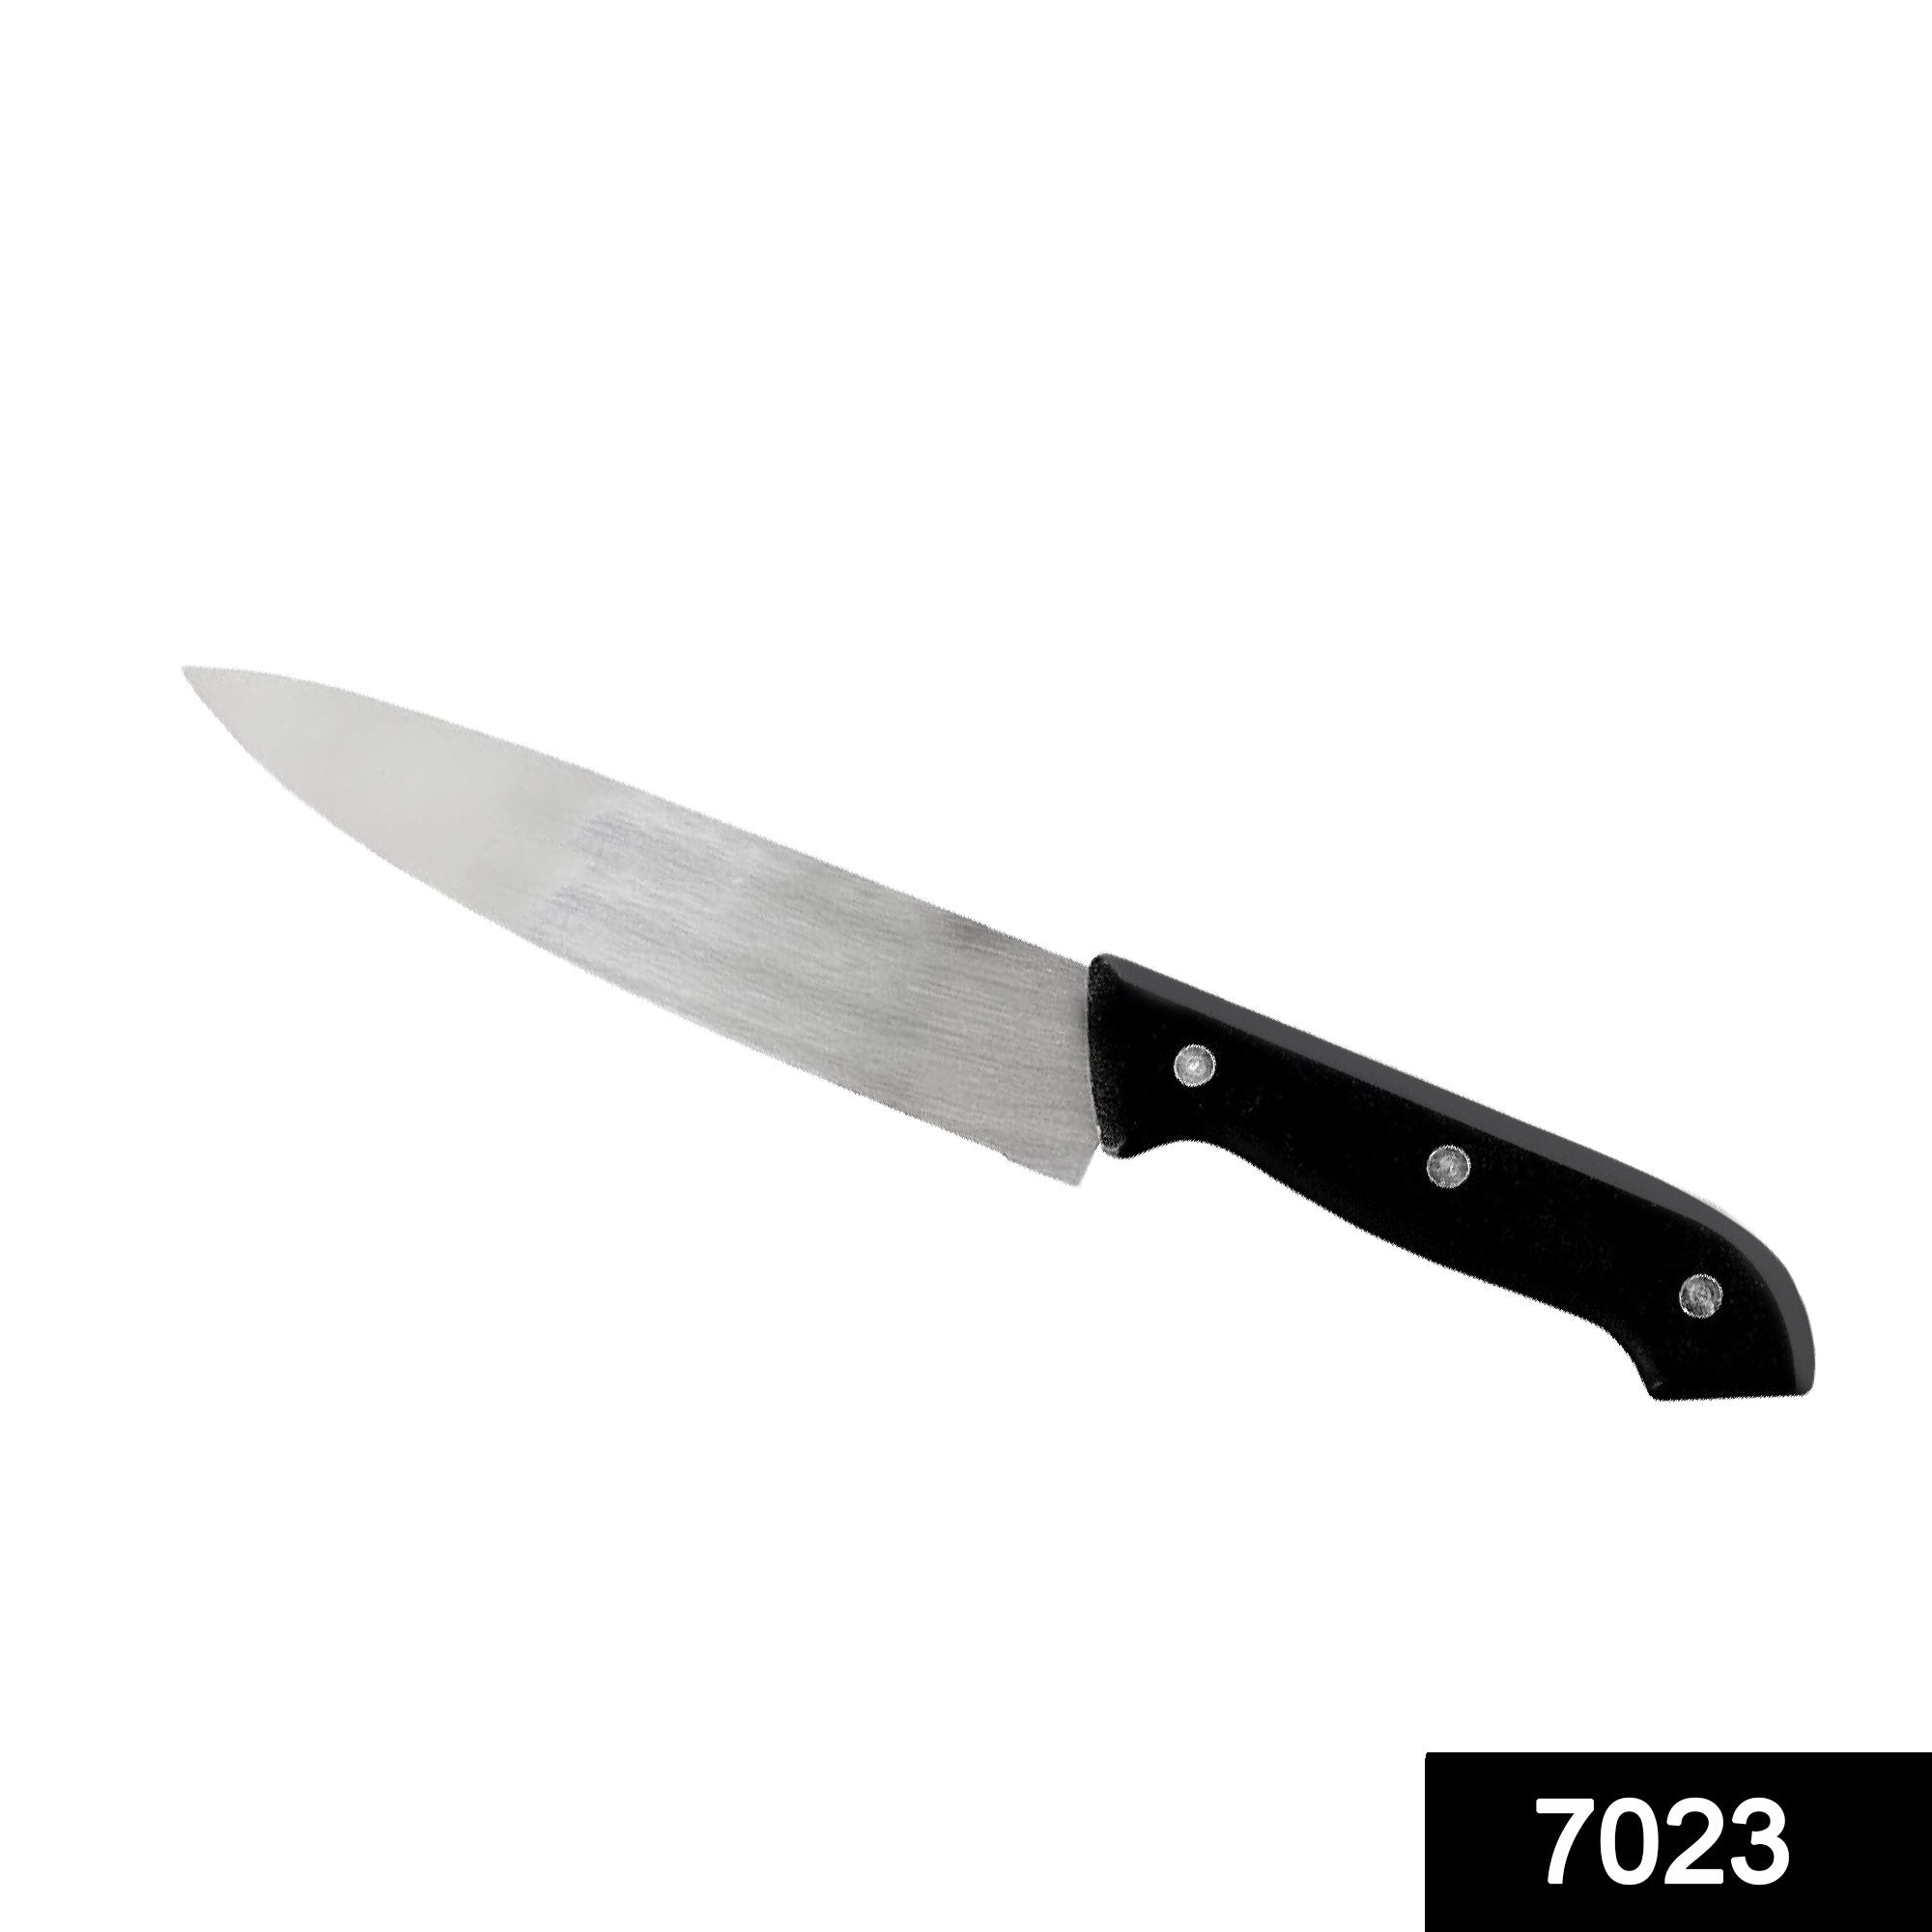 7023 Chief Knife Heavy Duty Vegetable and Non Veg Kitchen Knife (Big) - SkyShopy